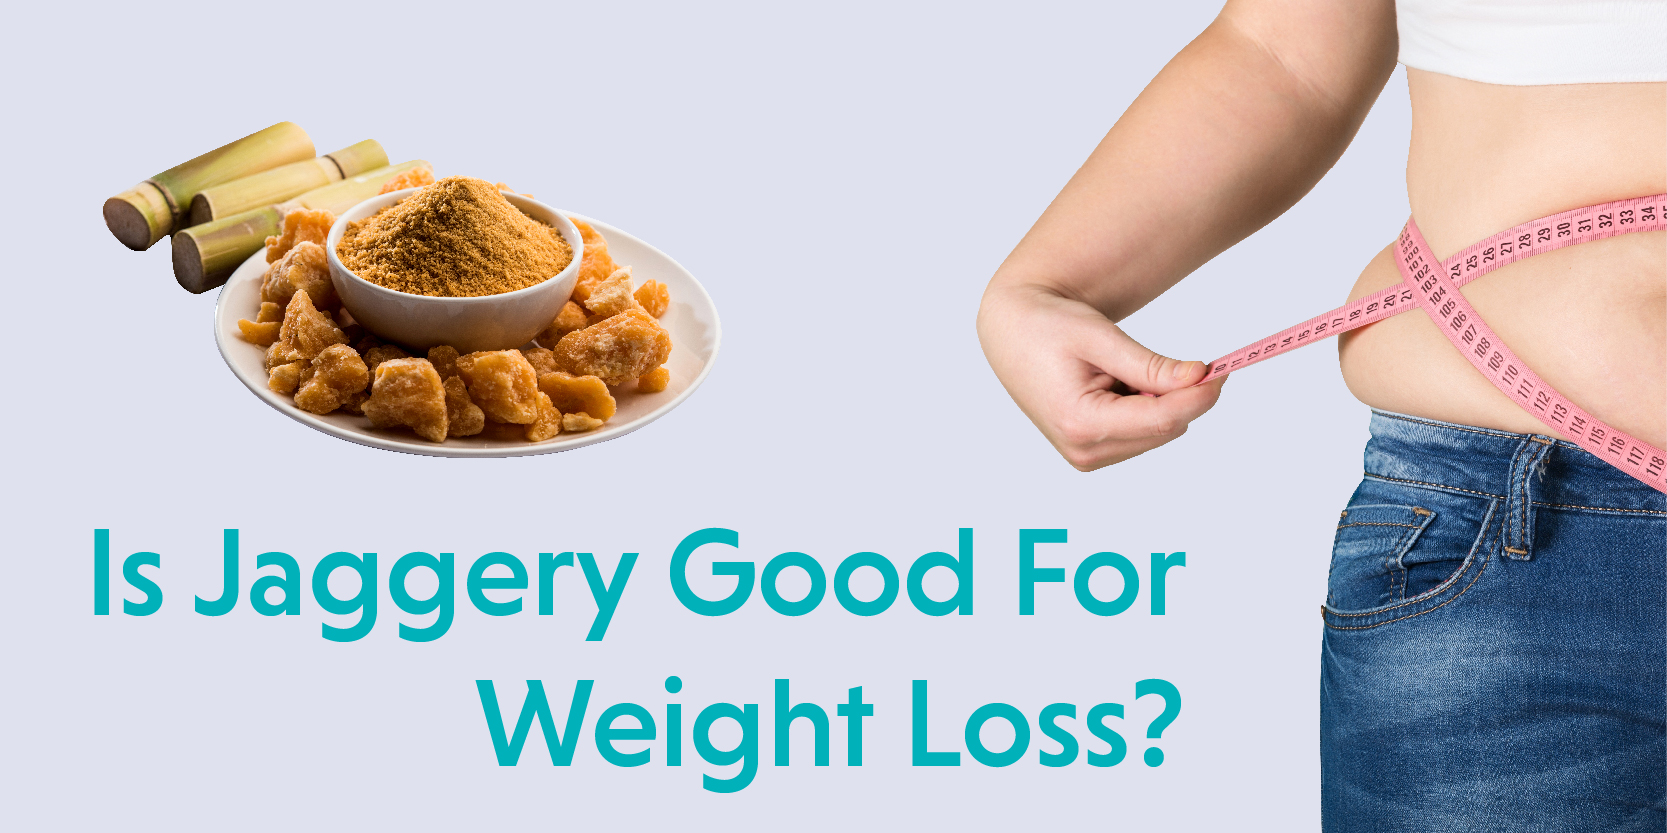 Is Jaggery Good For Weight Loss?